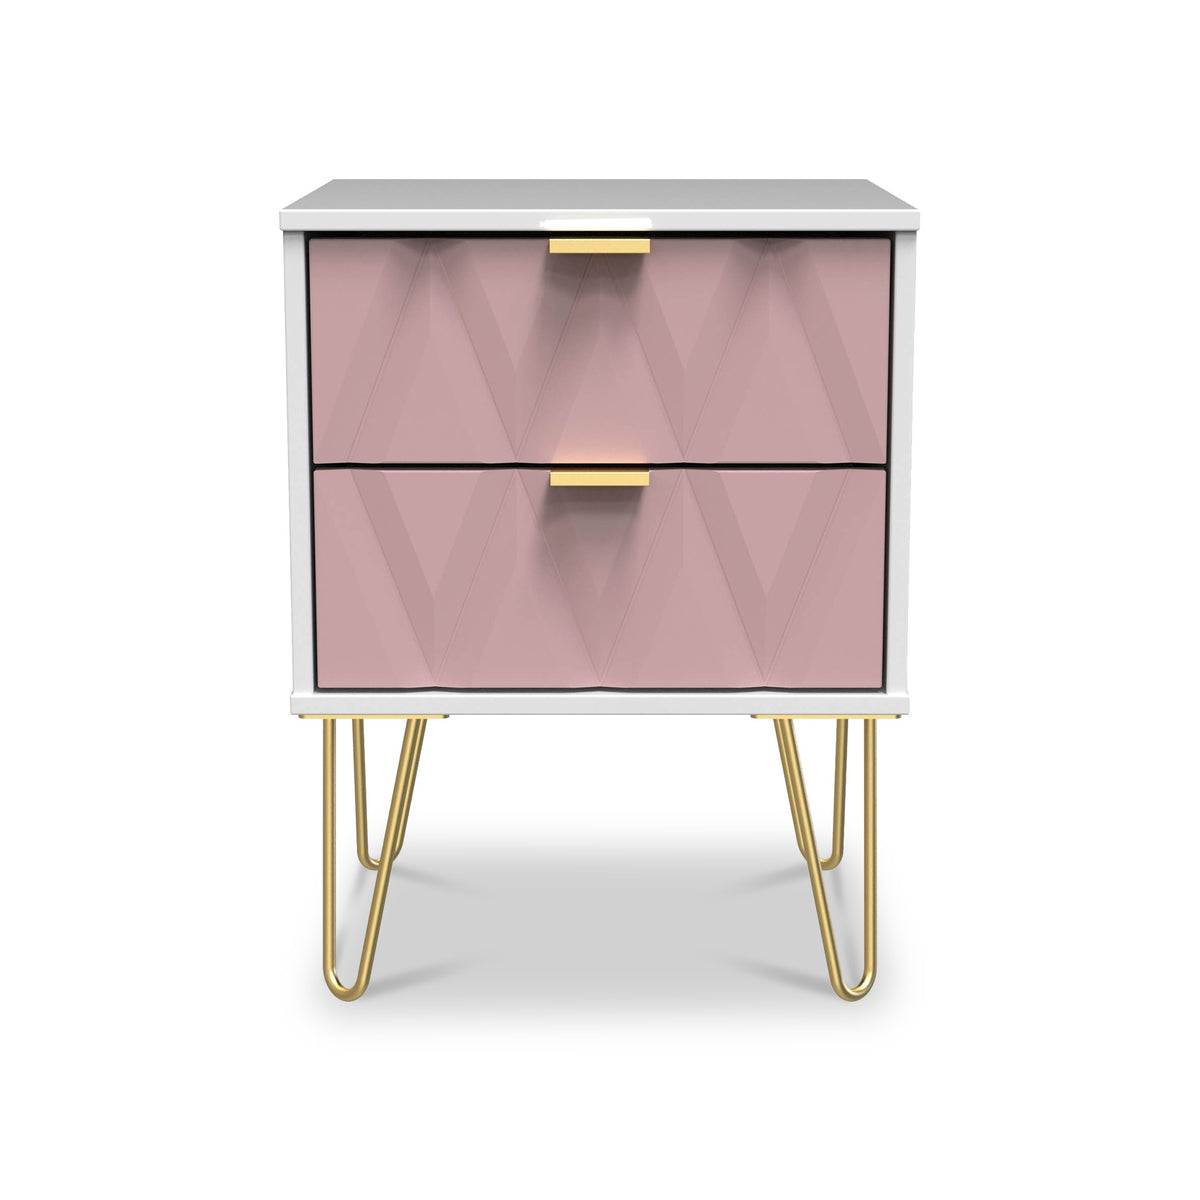 Geo White and Pink 2 Drawer Bedside Table Cabinet with Gold Hair Pin Legs from Roseland Furniture